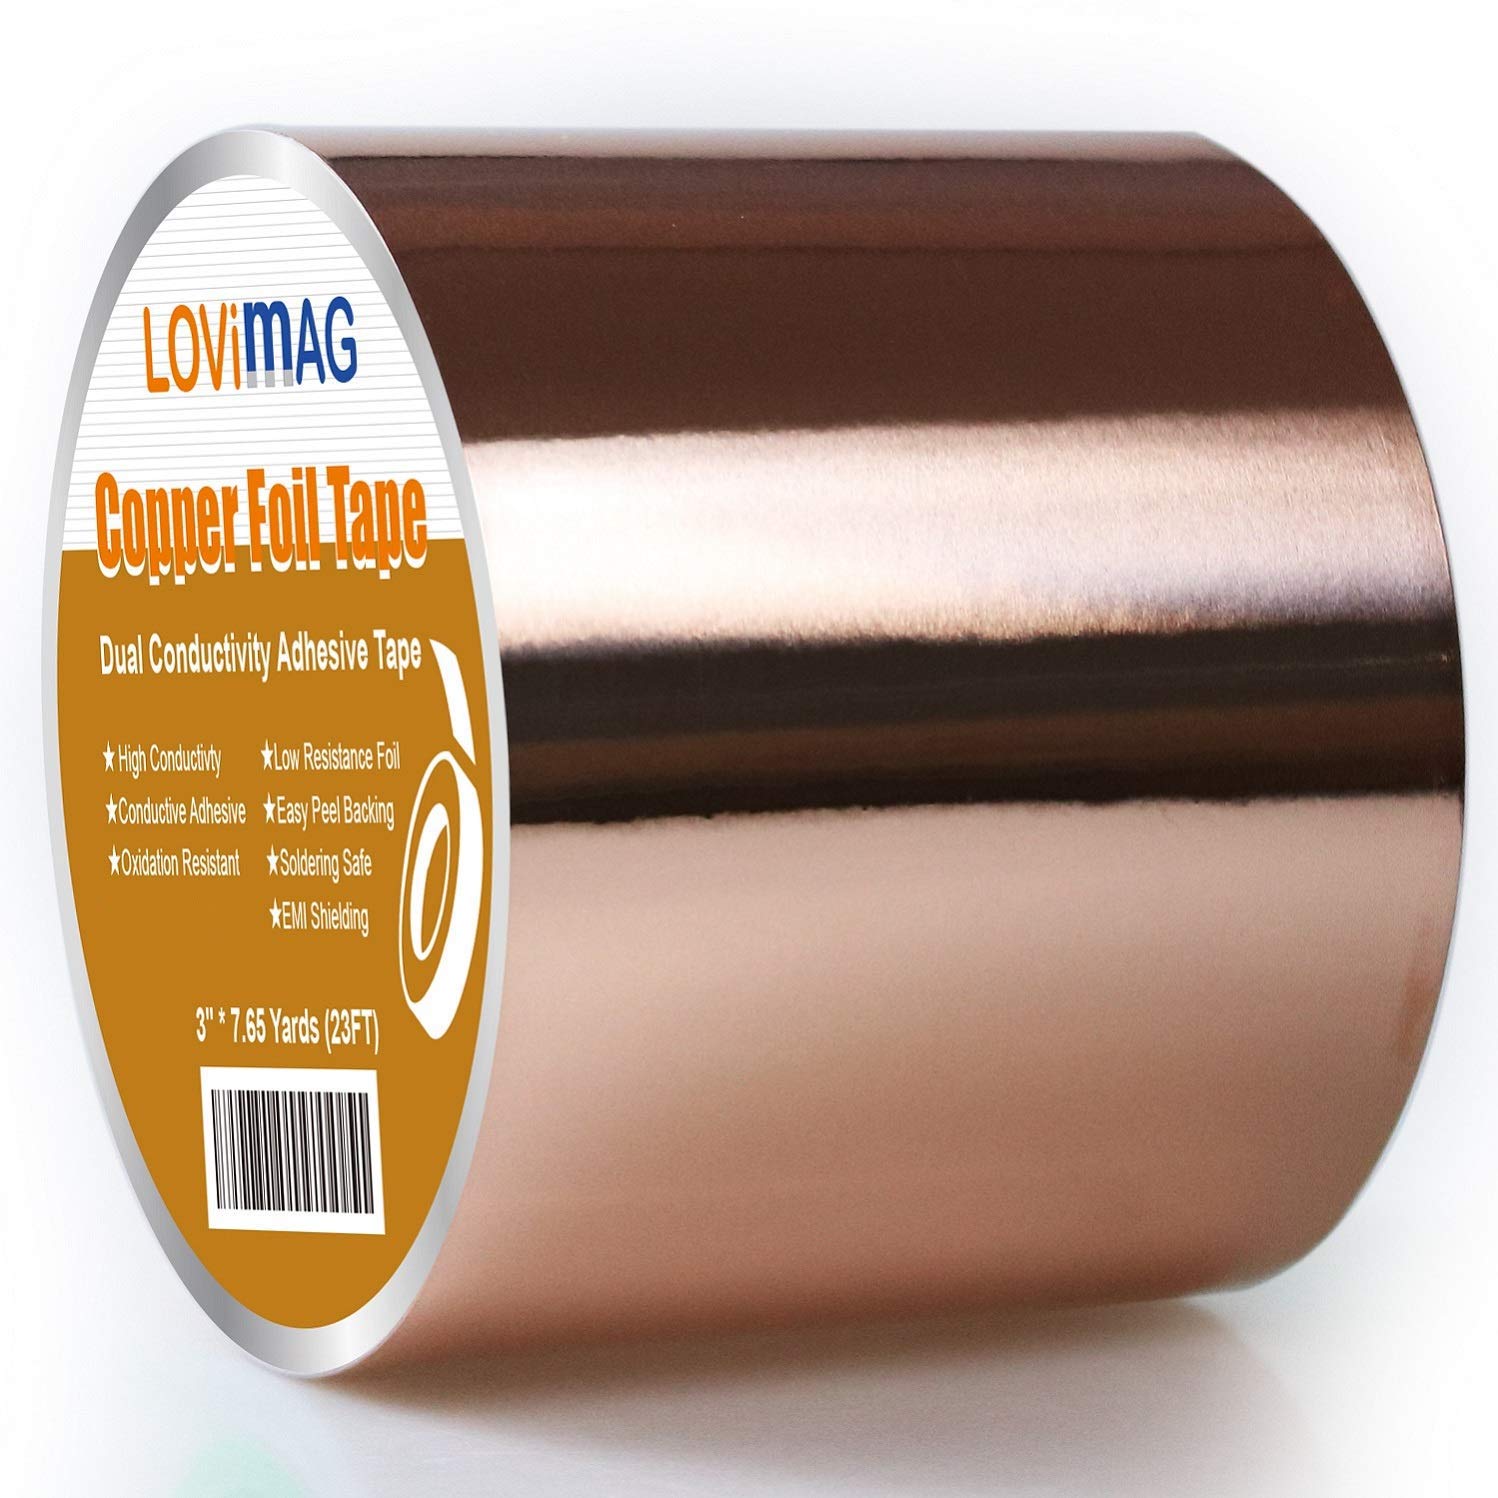 LOVIMAG Copper Foil Tape (1inch X 66 FT) with Conductive Adhesive